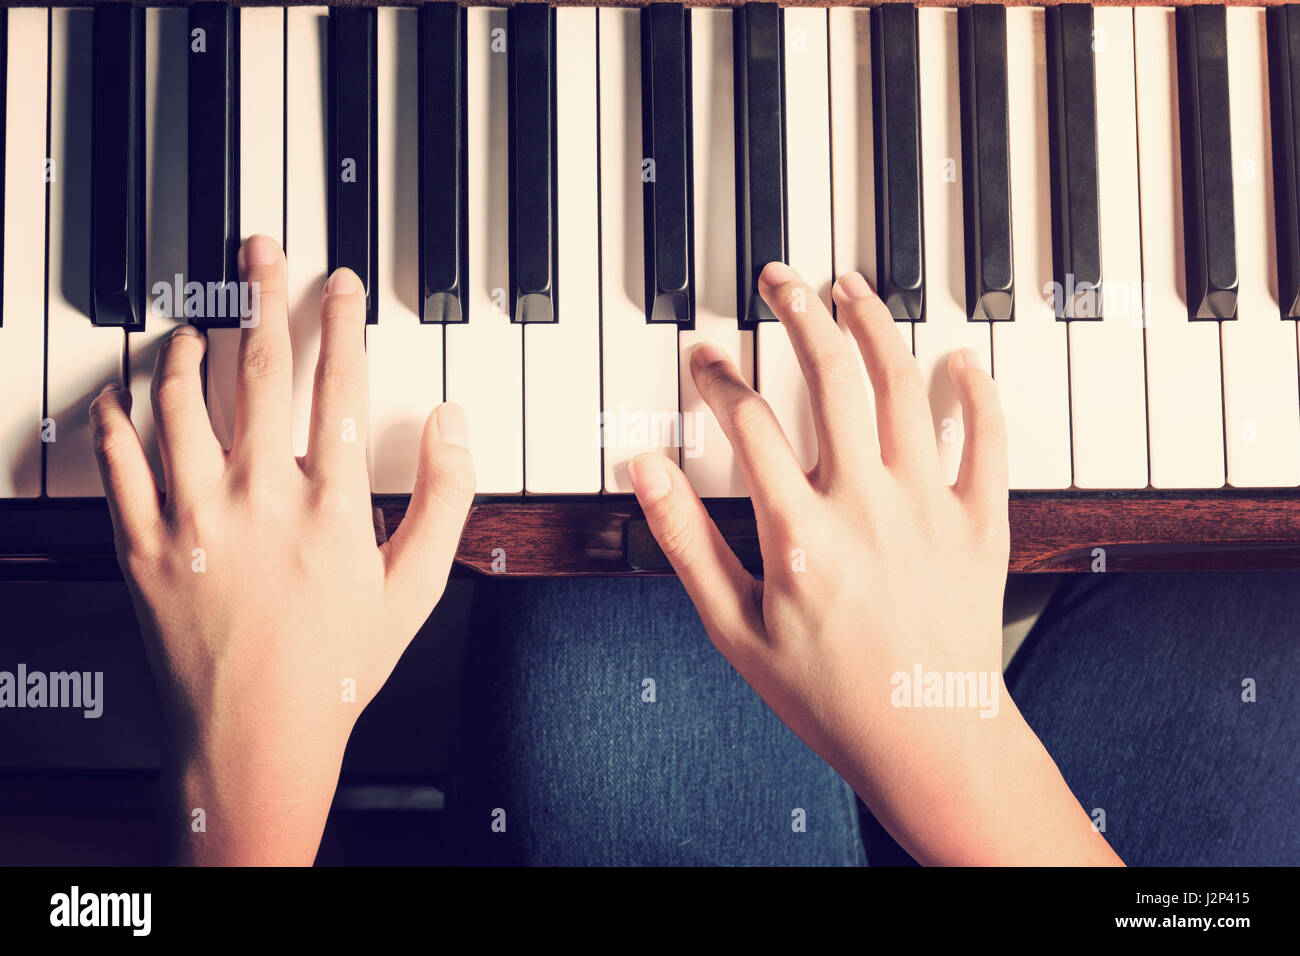 Female hands playing piano with high contrast vintage and retro look added Stock Photo